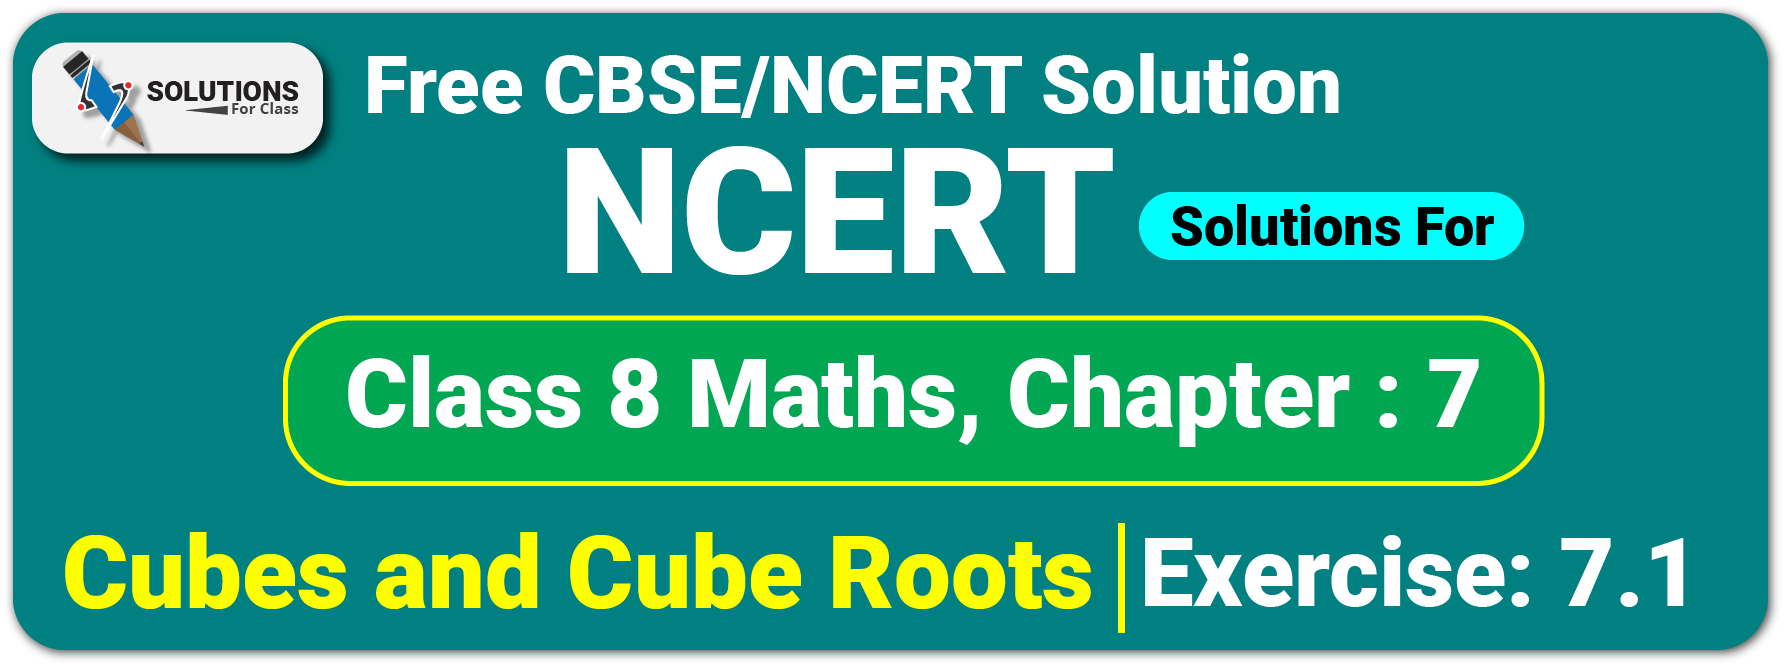 NCERT Solutions Class 8 Chapter 7, Cubes and Cube Roots, Exercise.7.1